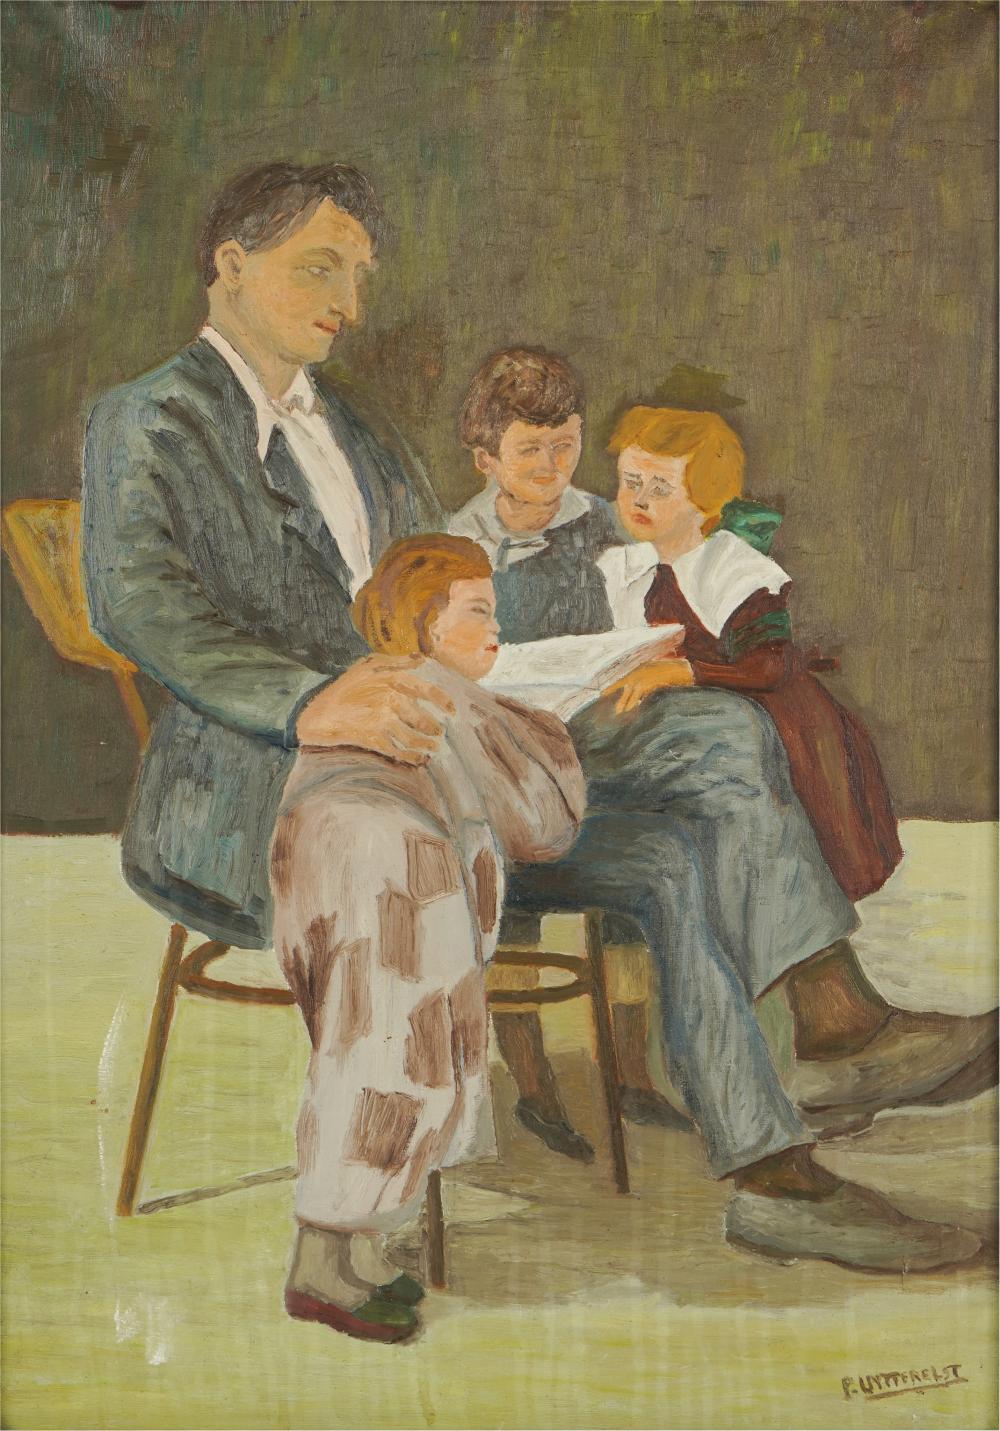 20TH CENTURY: SEATED MAN WITH CHILDRENoil